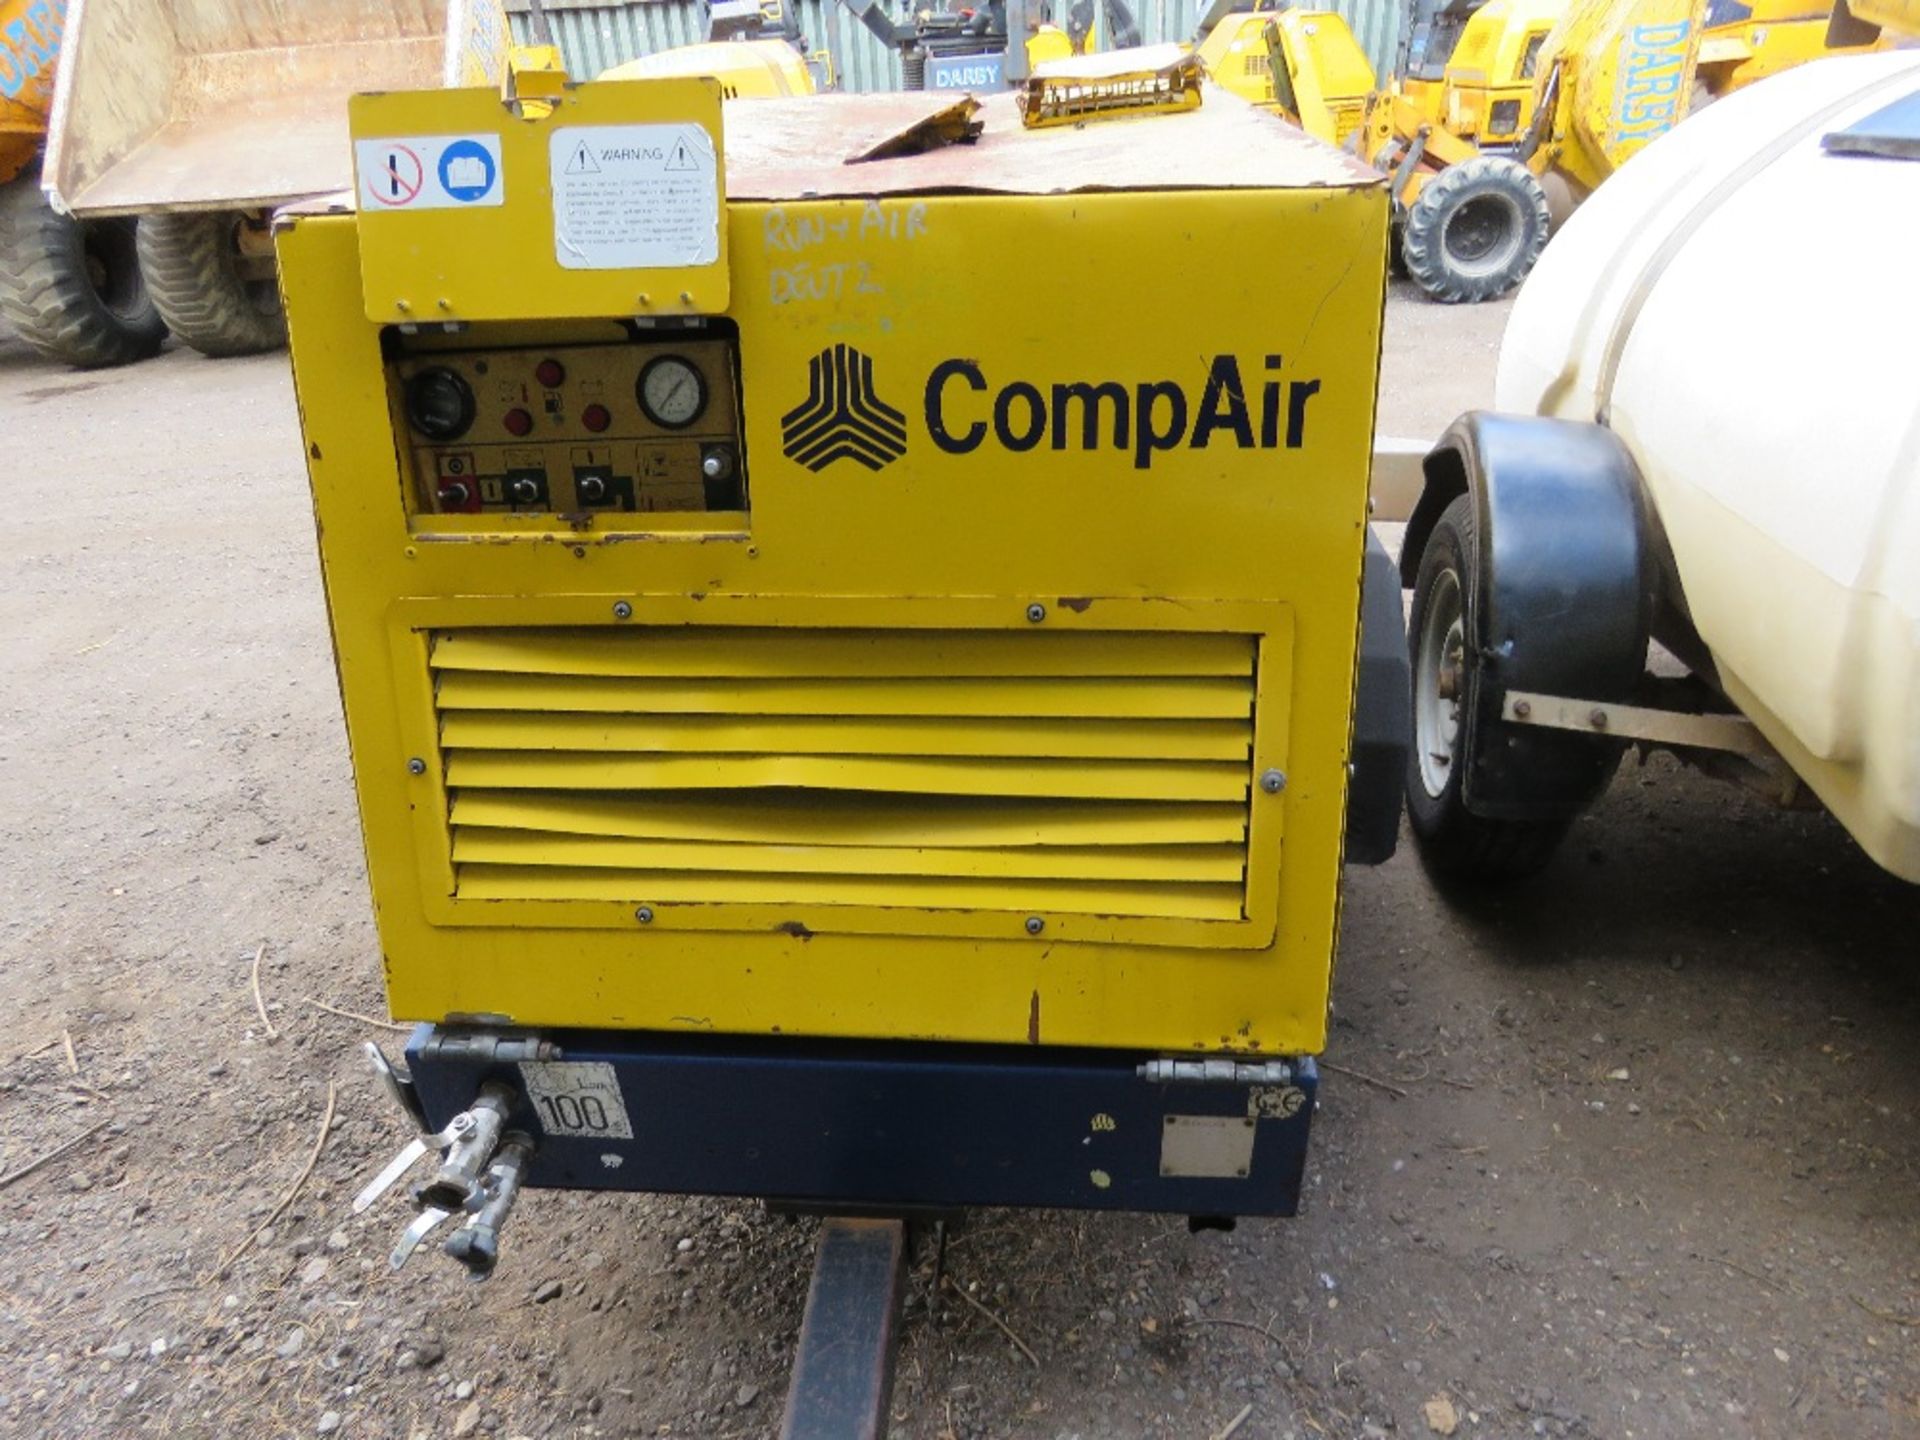 COMPAIR TOWED COMPRESSOR WITH DEUTZ ENGINE. WHEN TESTED WAS SEEN TO RUN AND MAKE AIR. - Image 3 of 5